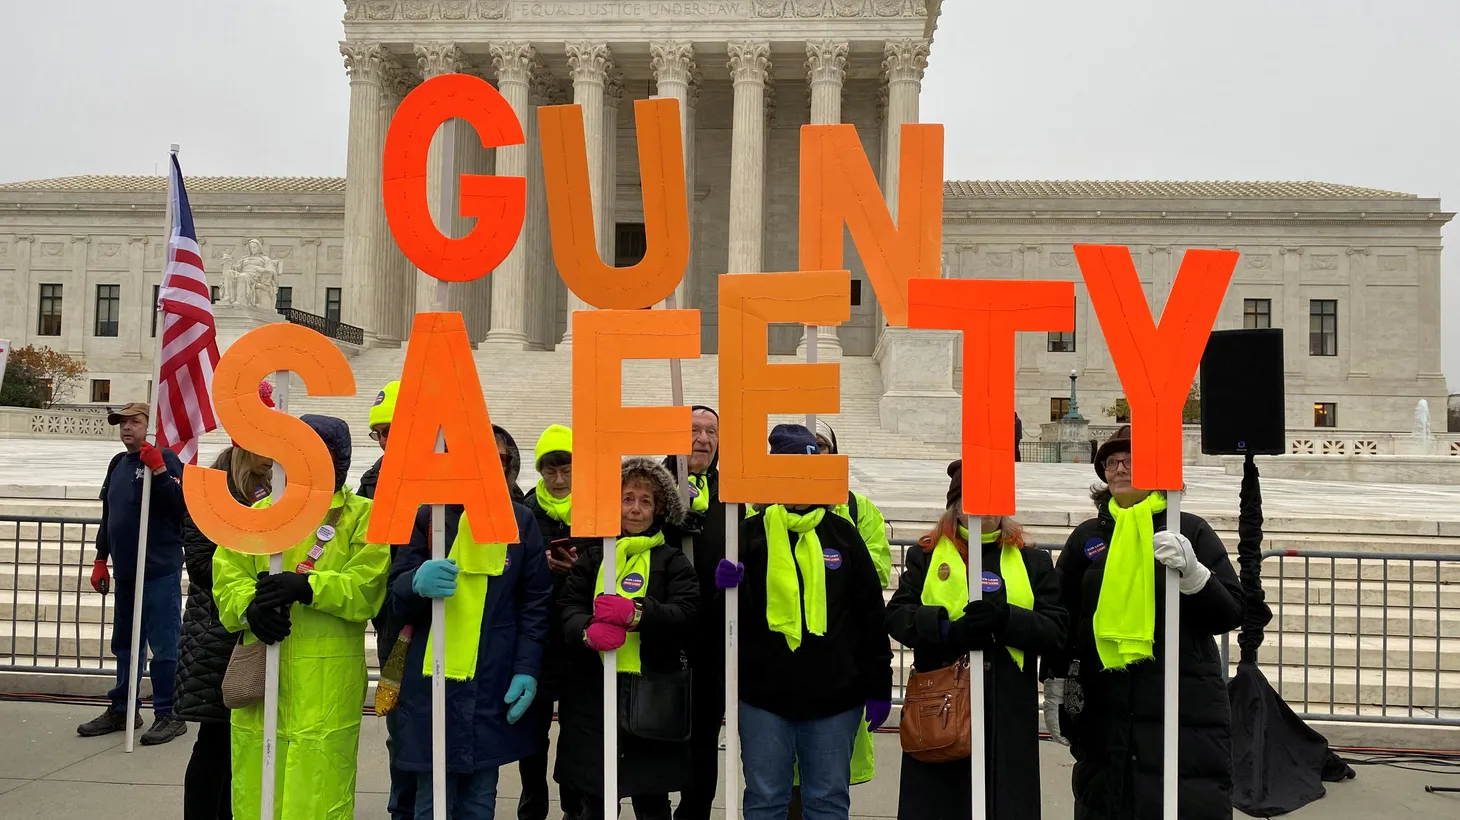 Supporters of gun control rally in front of the U.S. Supreme Court as the justices hear the first major gun rights case since 2010.